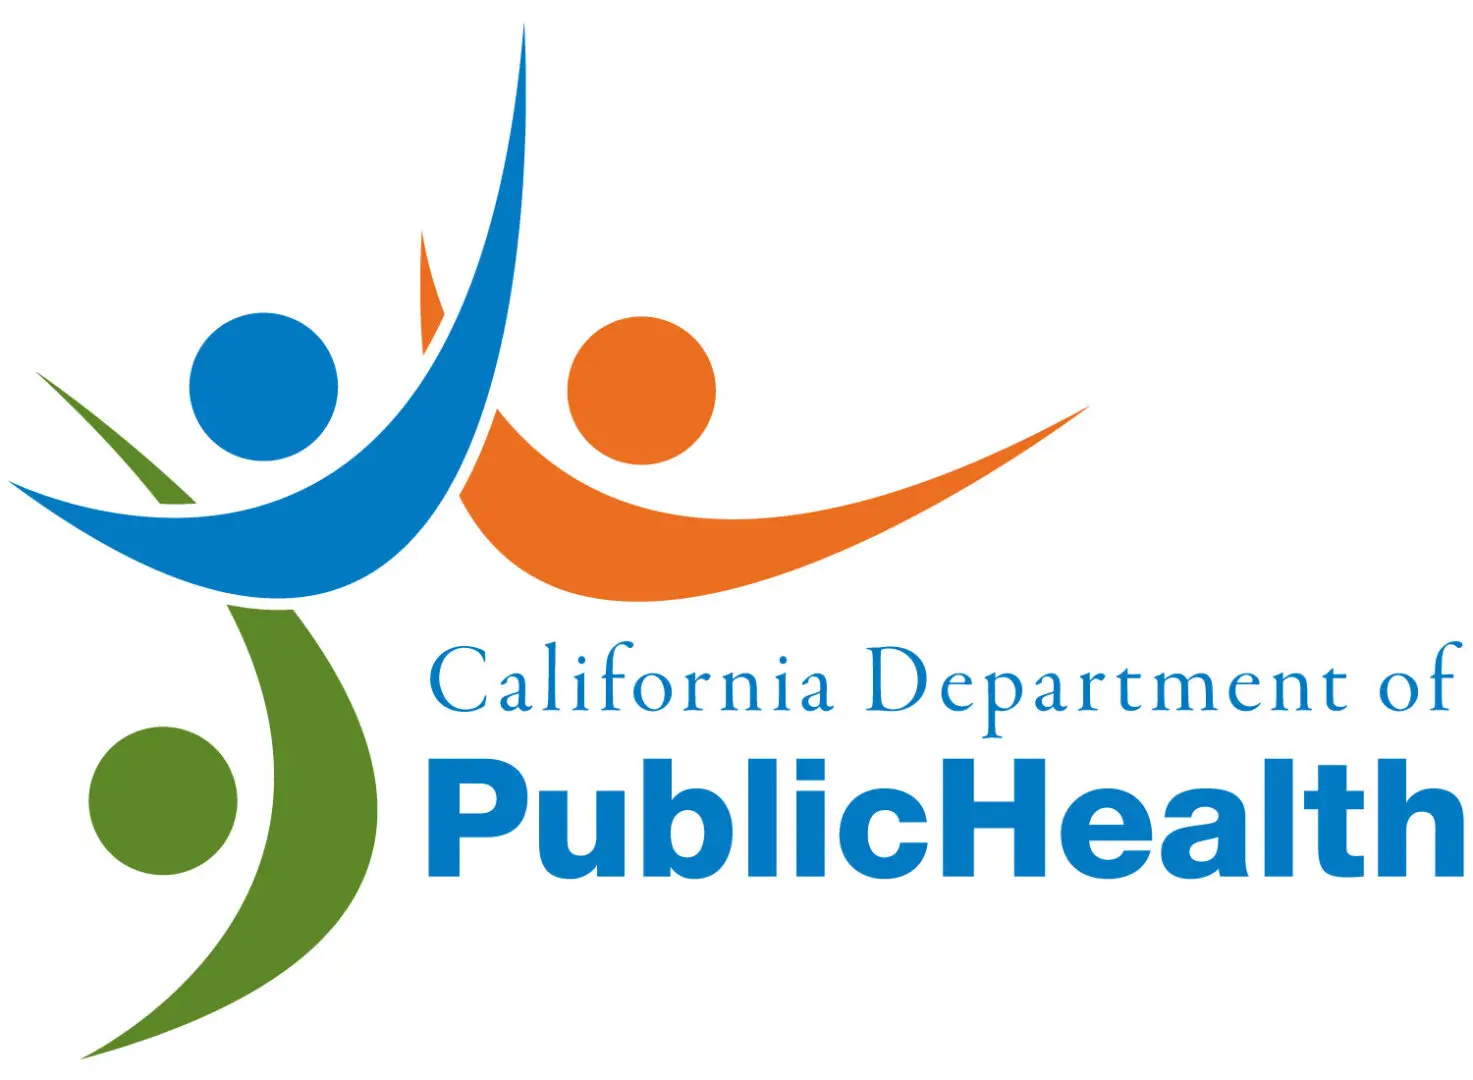 A logo for the california department of public health.